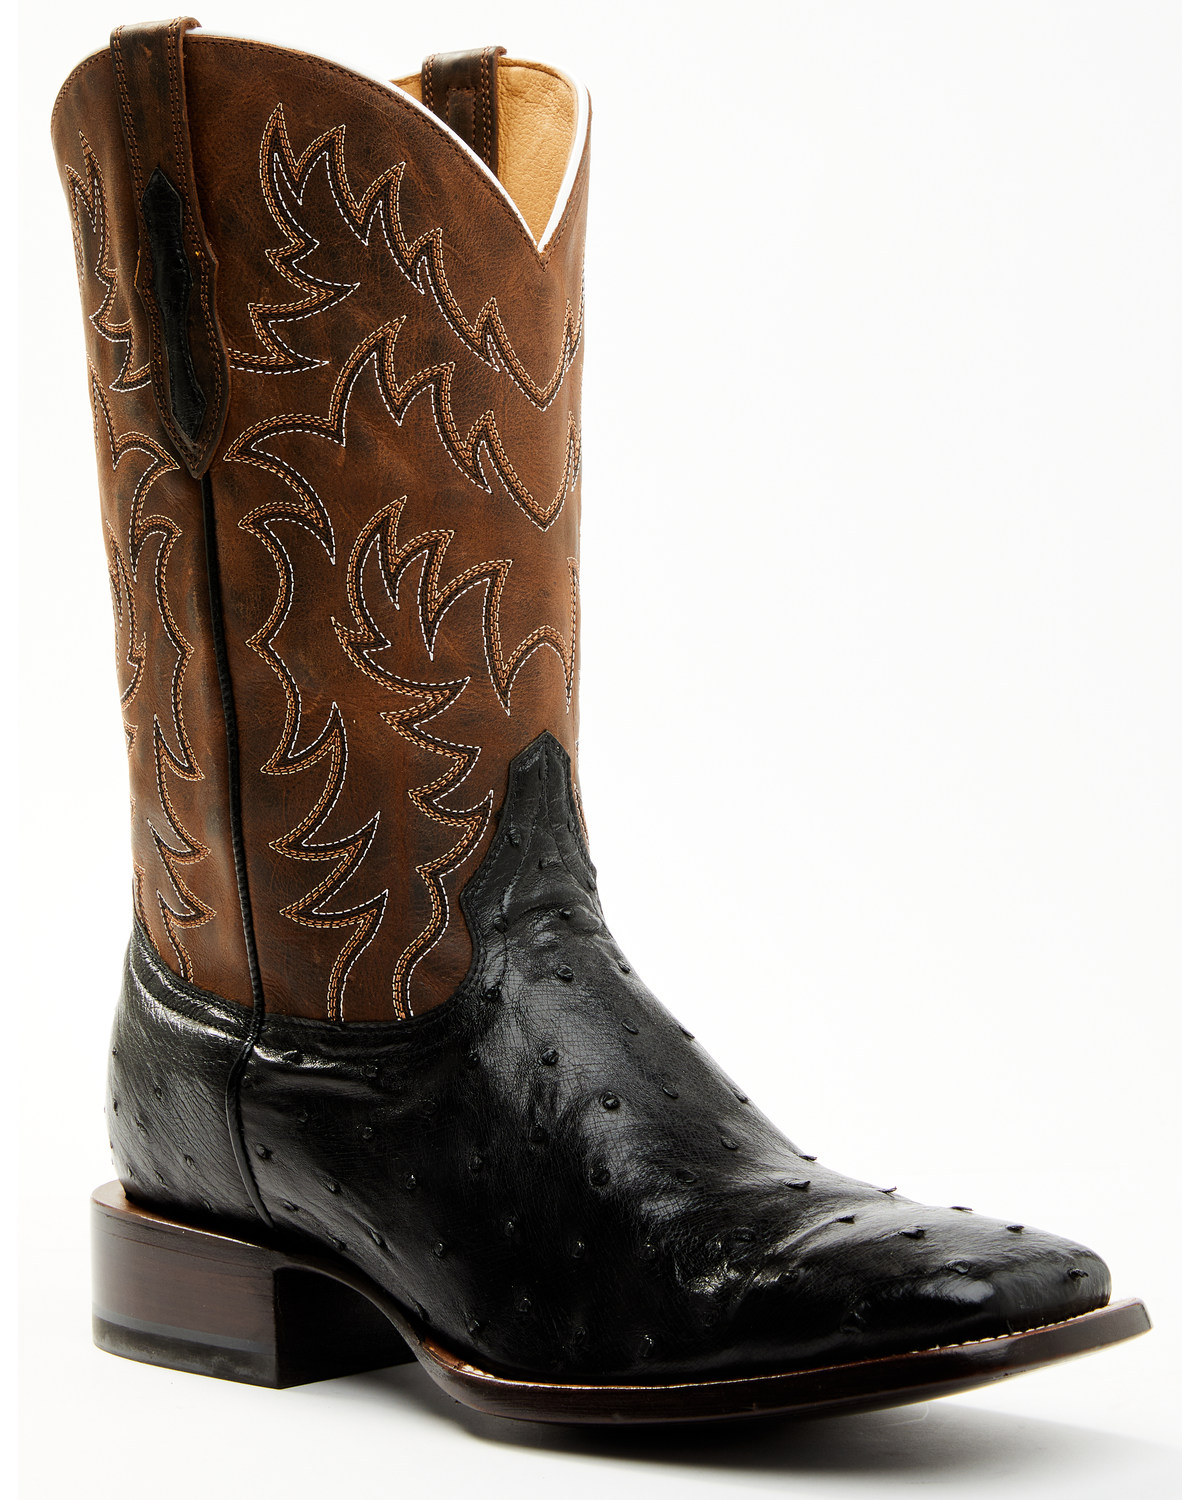 Cody James Men's Saddle Black Full-Quill Ostrich Exotic Western Boots - Broad Square Toe